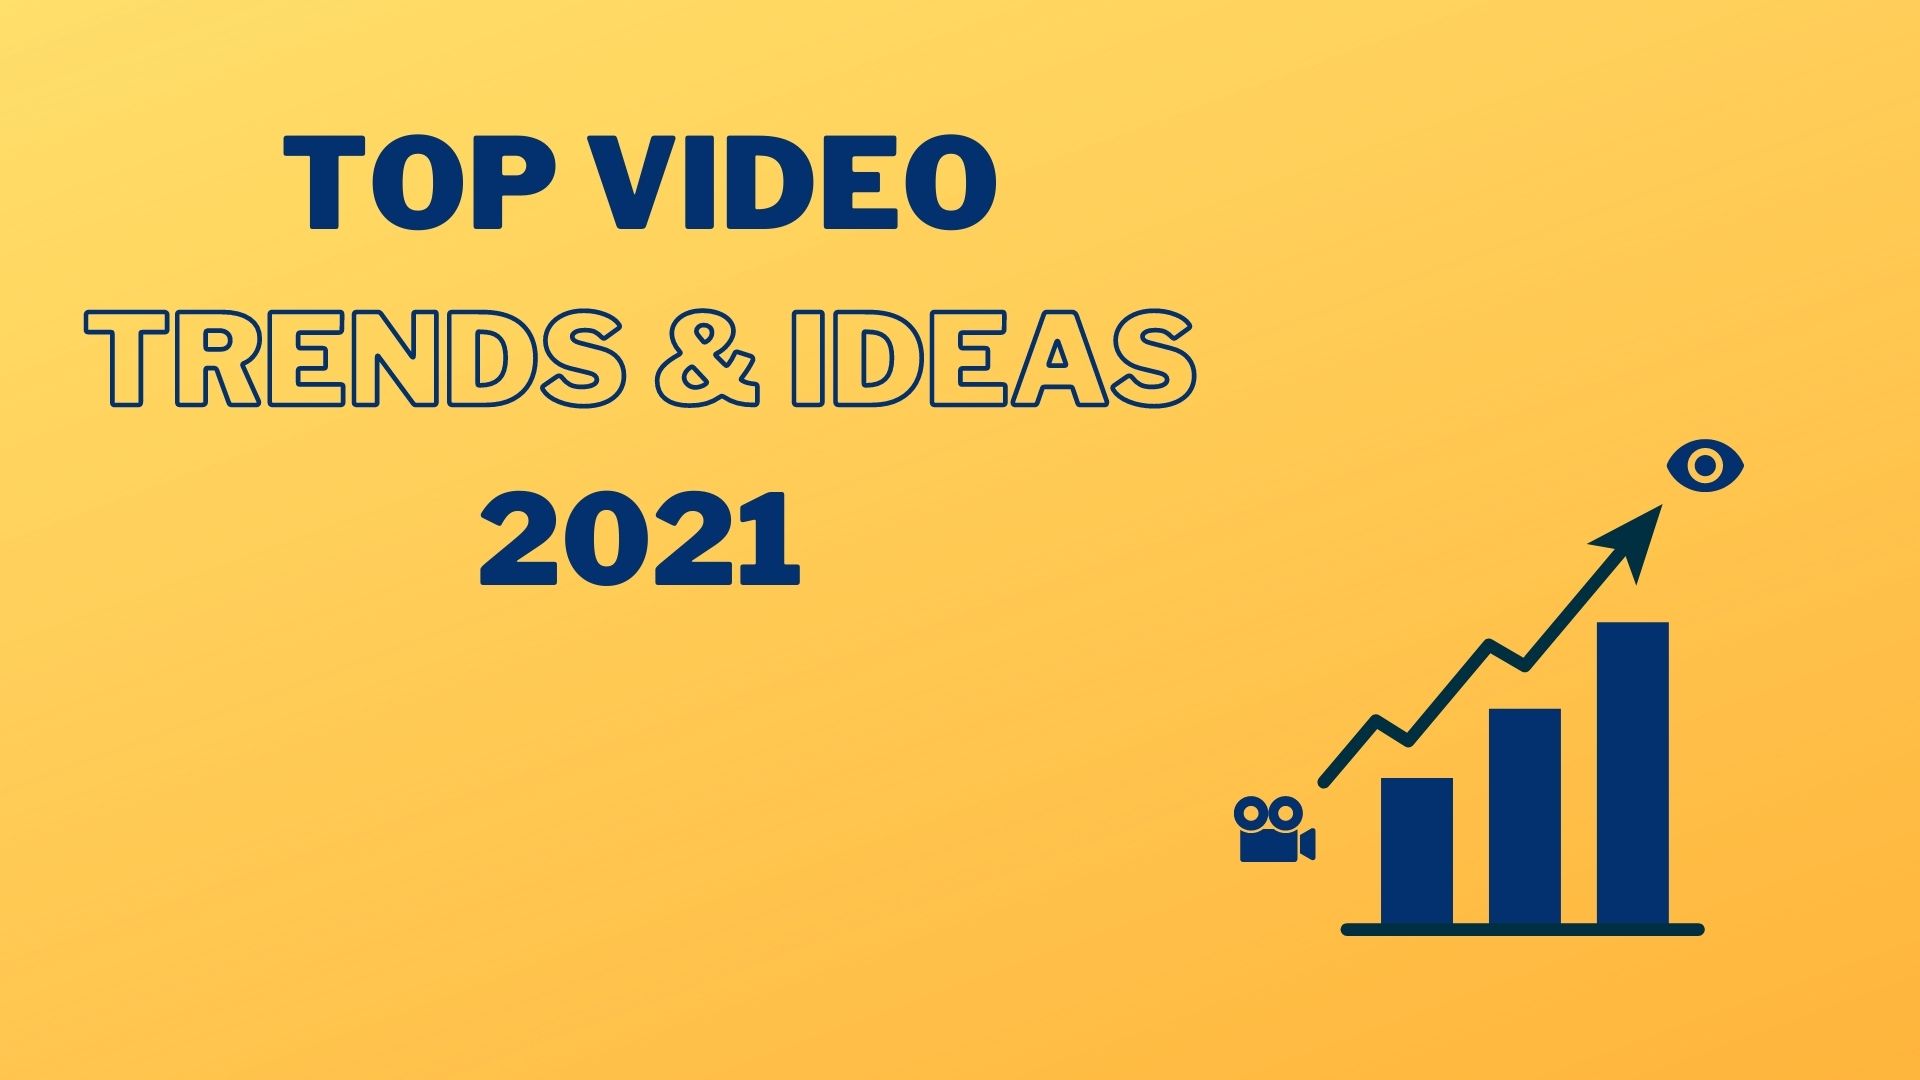 Top Video Trends and Ideas 2021